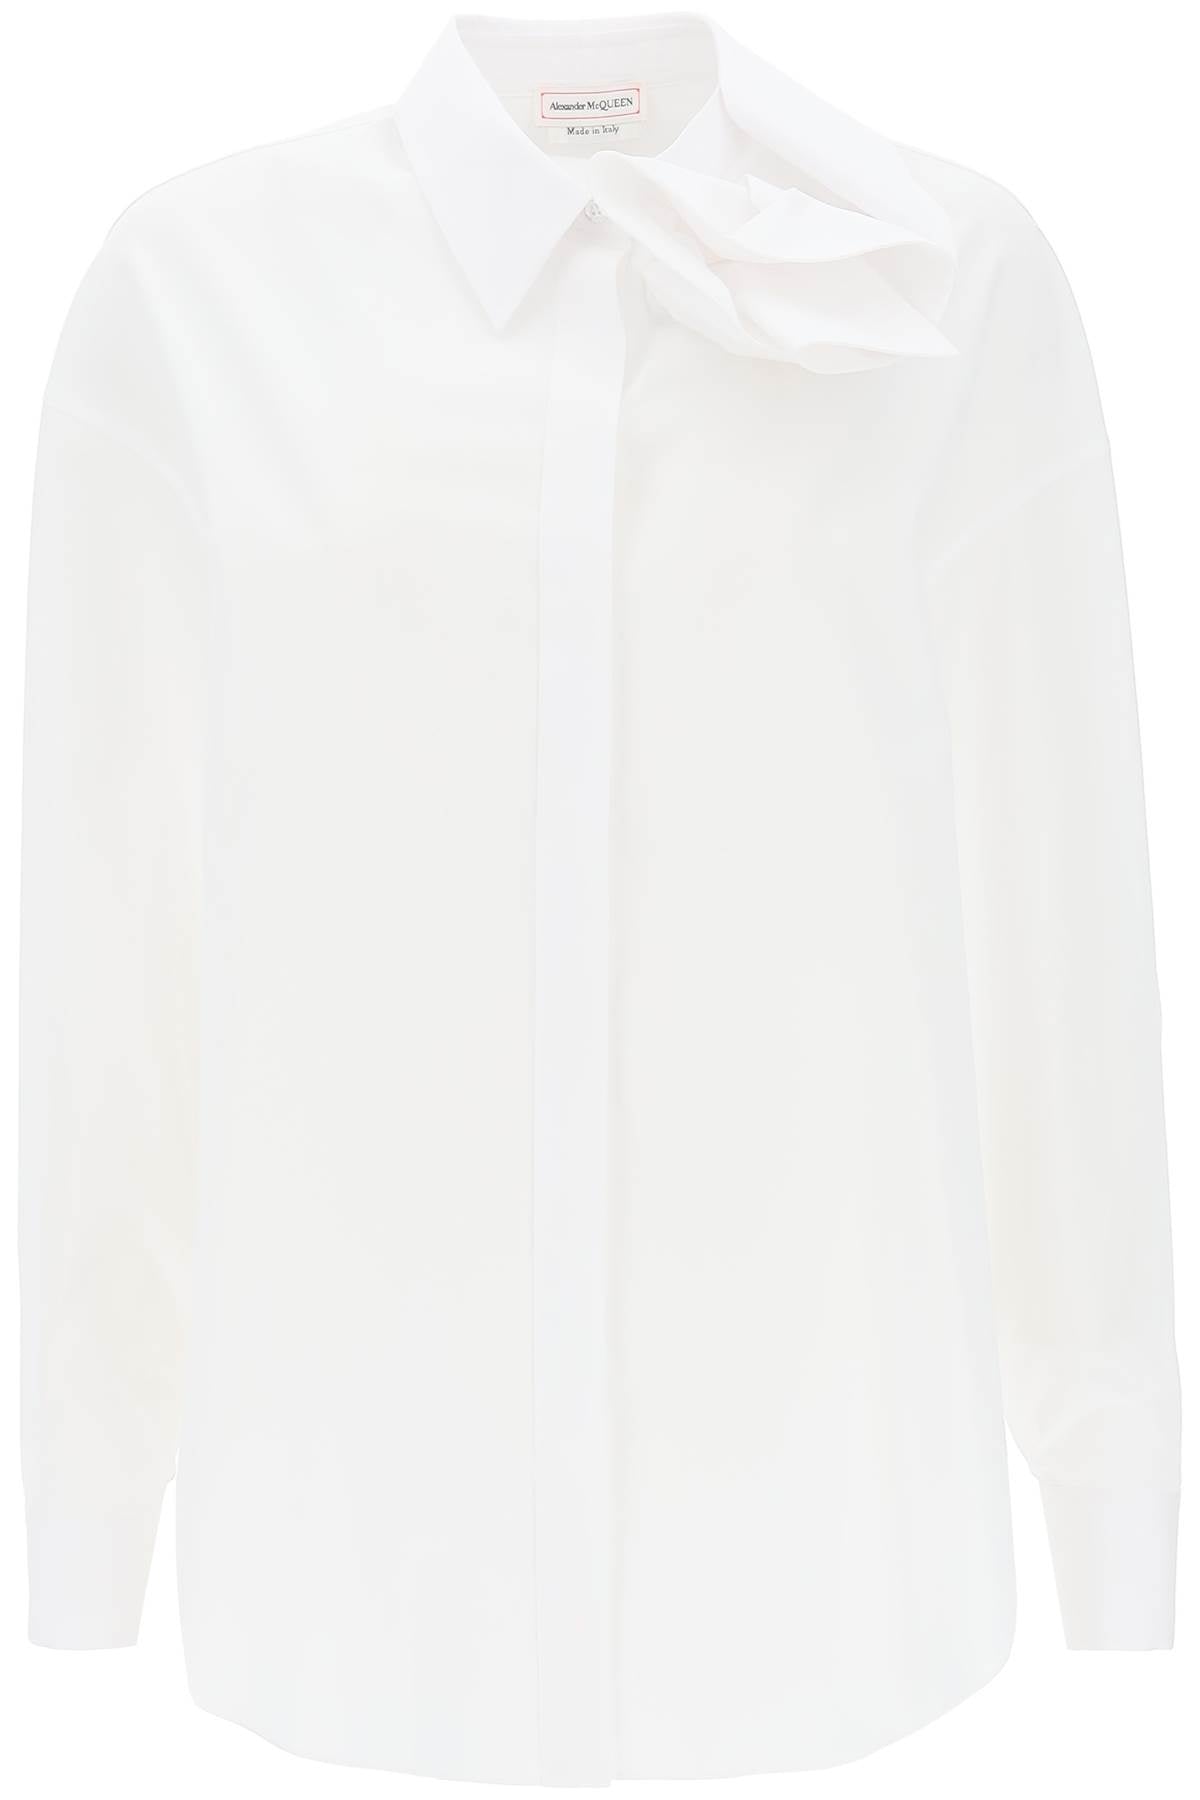 Alexander Mcqueen Women's White Shirt With Orchid Detail